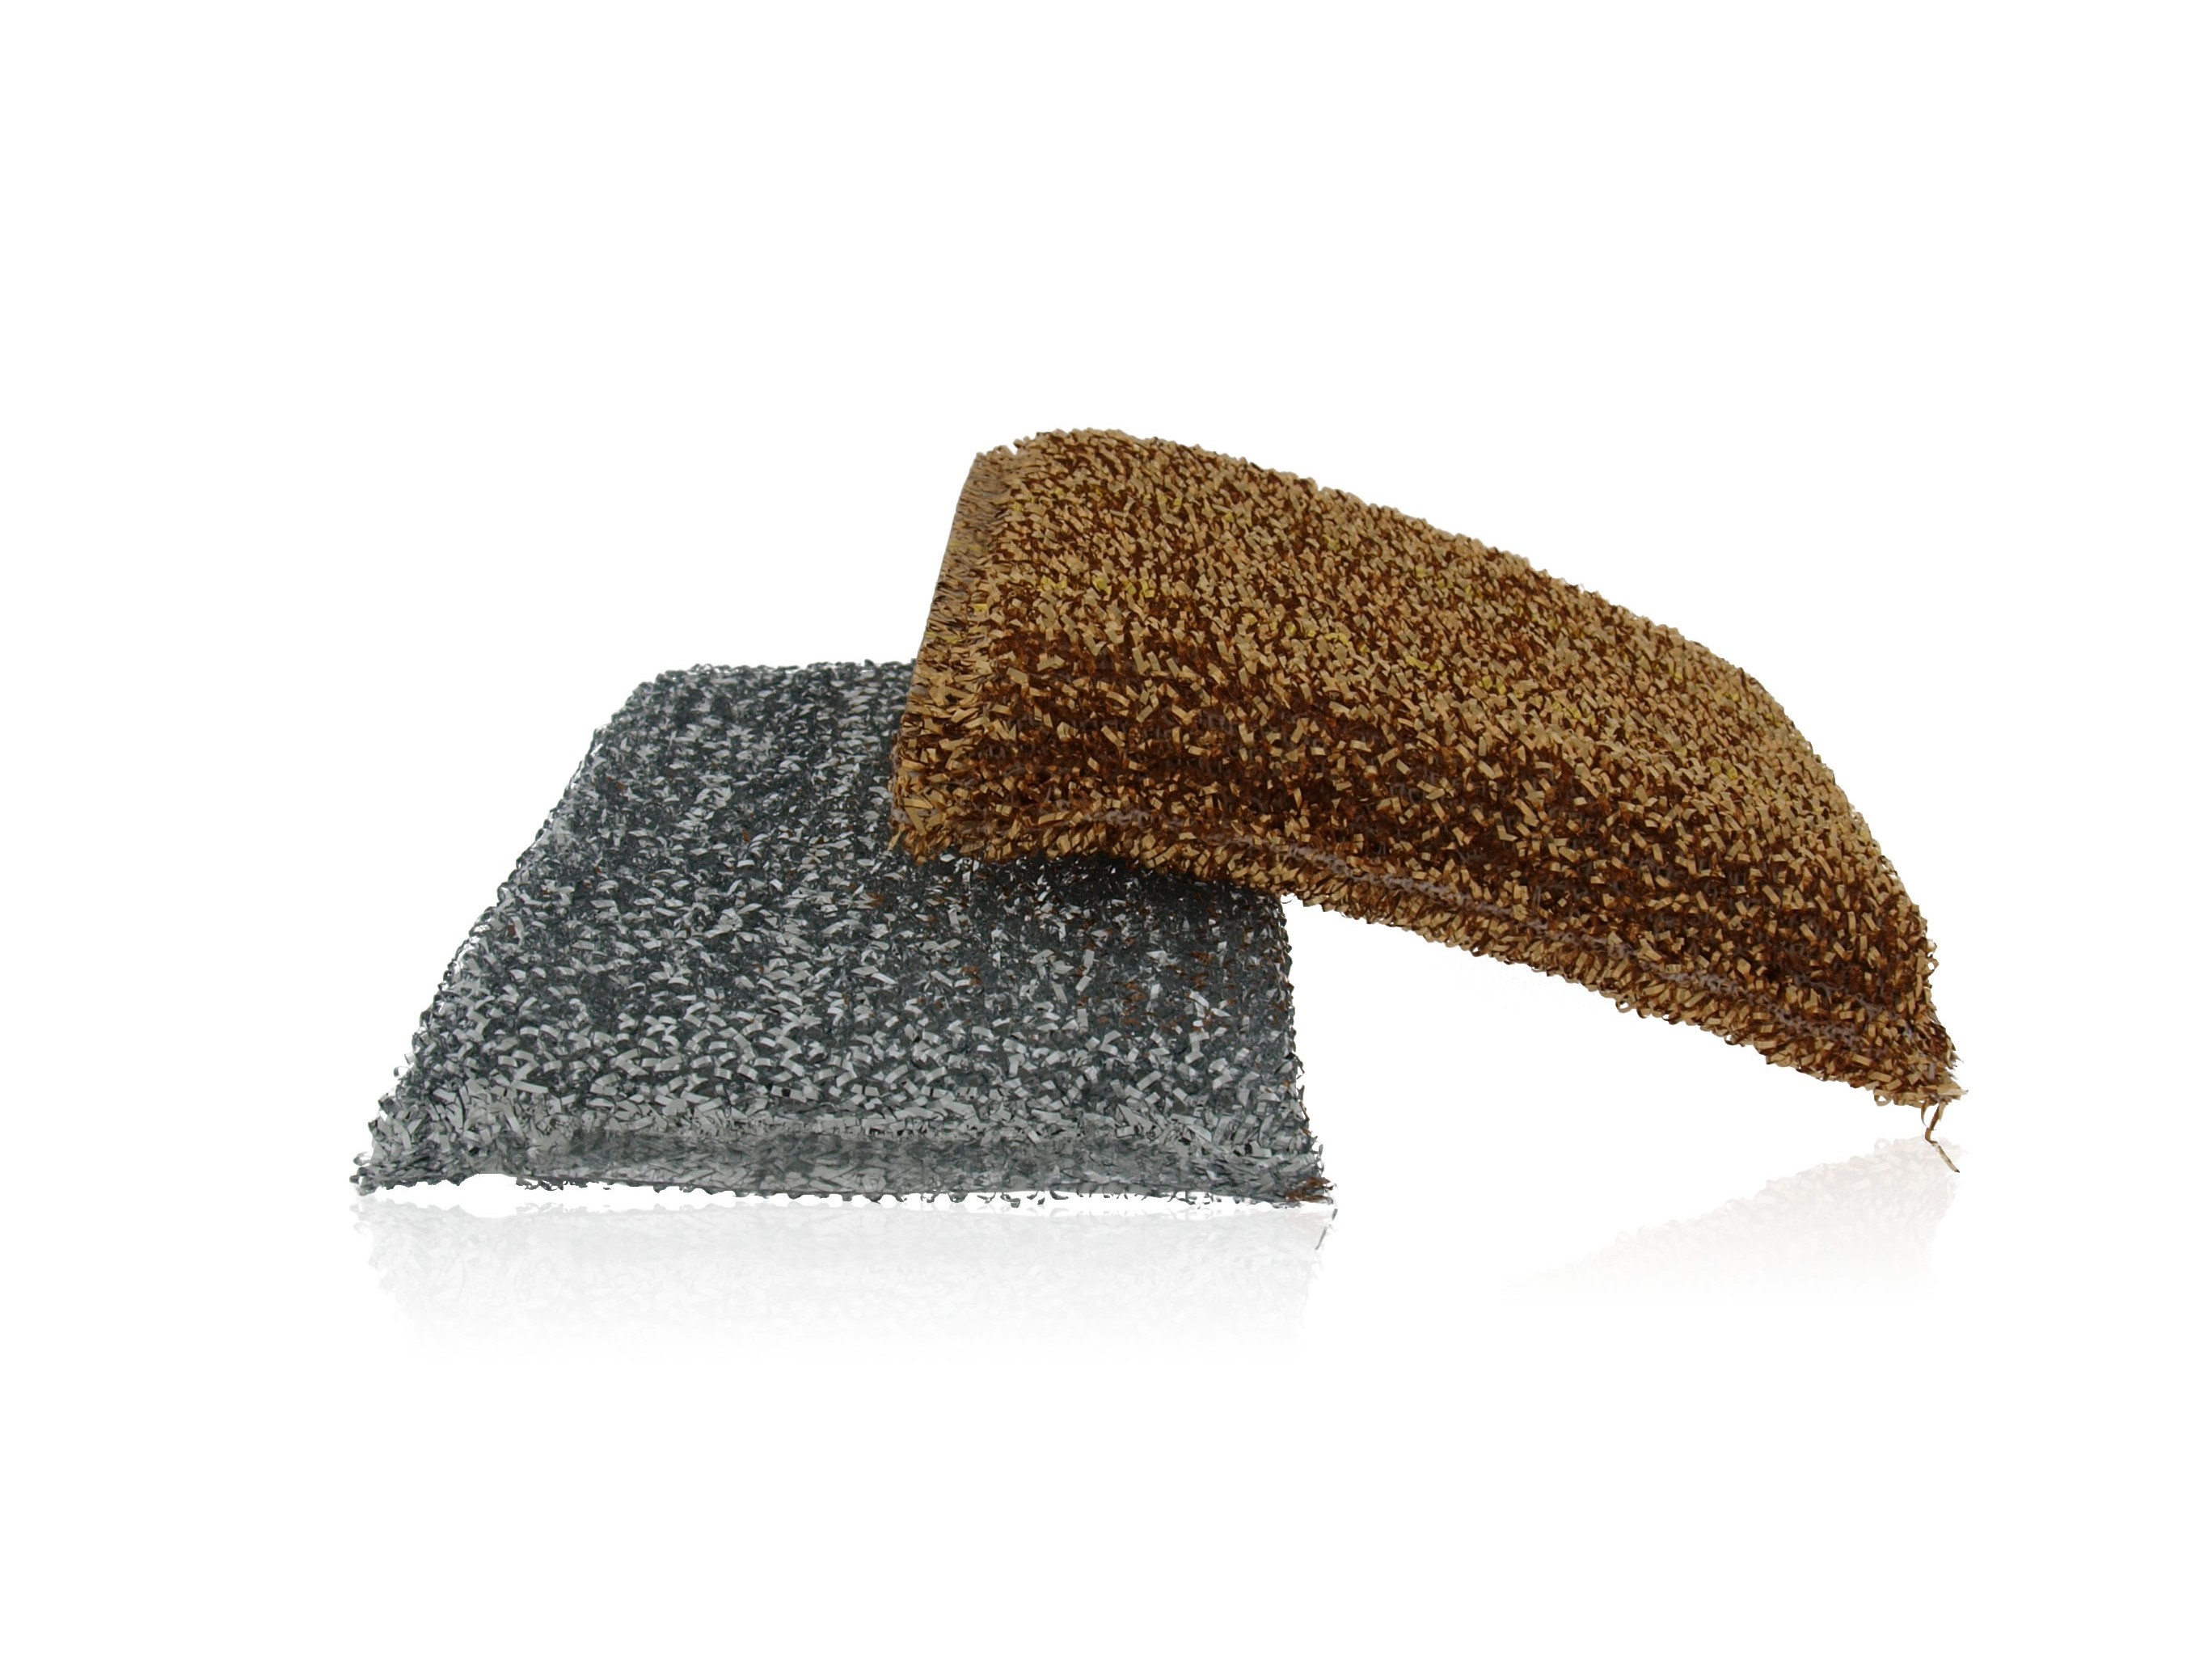 https://www.worldofjudaica.com/media/catalog/product/Assets/NewProductImages/product_page_image_large/3/6/36415_nylon_scrubbing_sponges_from_israel_pack_of_six_view_1.jpg